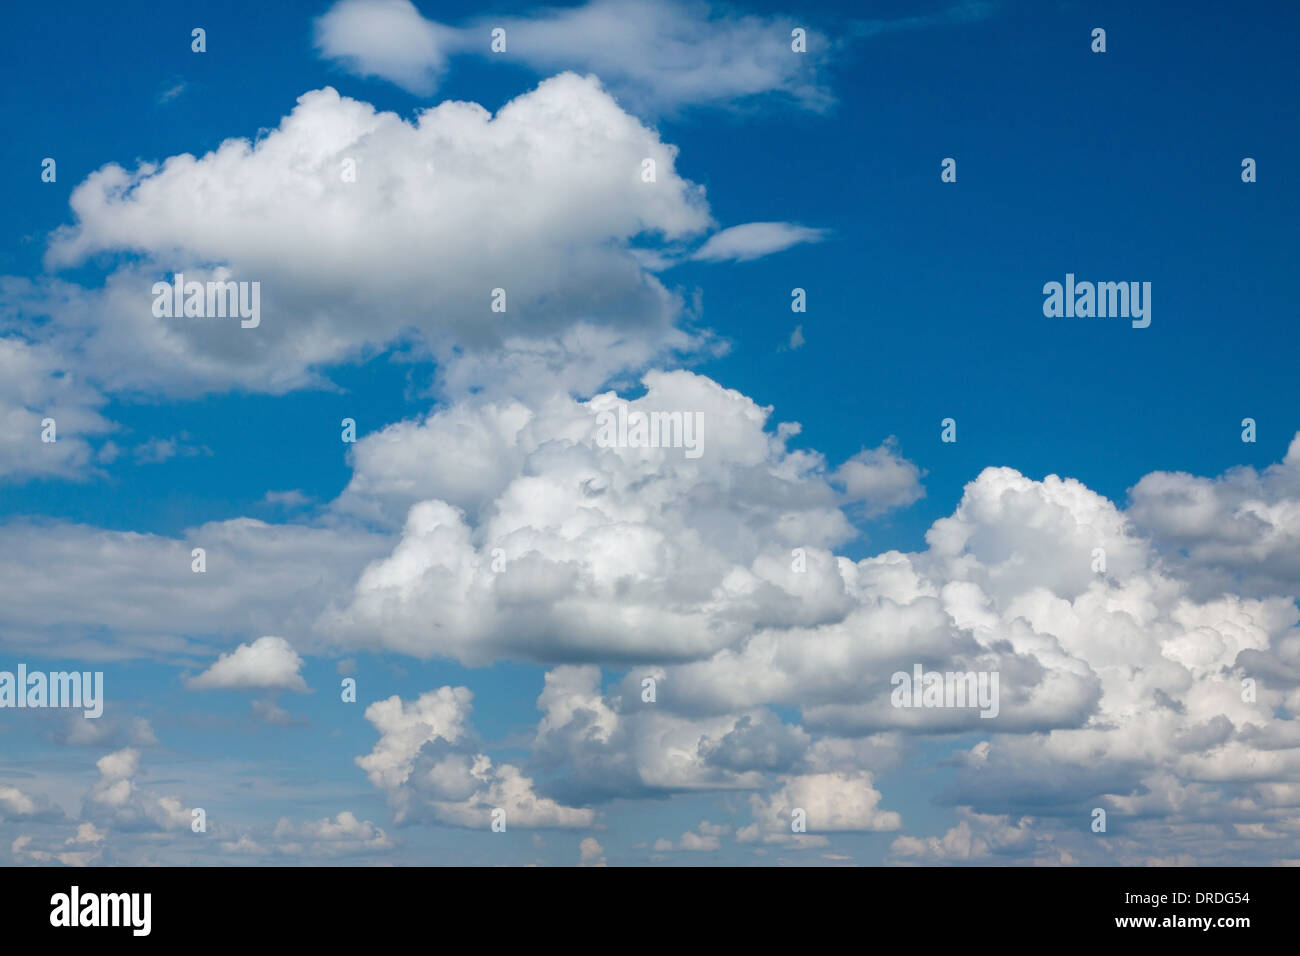 Blue summer sky with white clouds Stock Photo